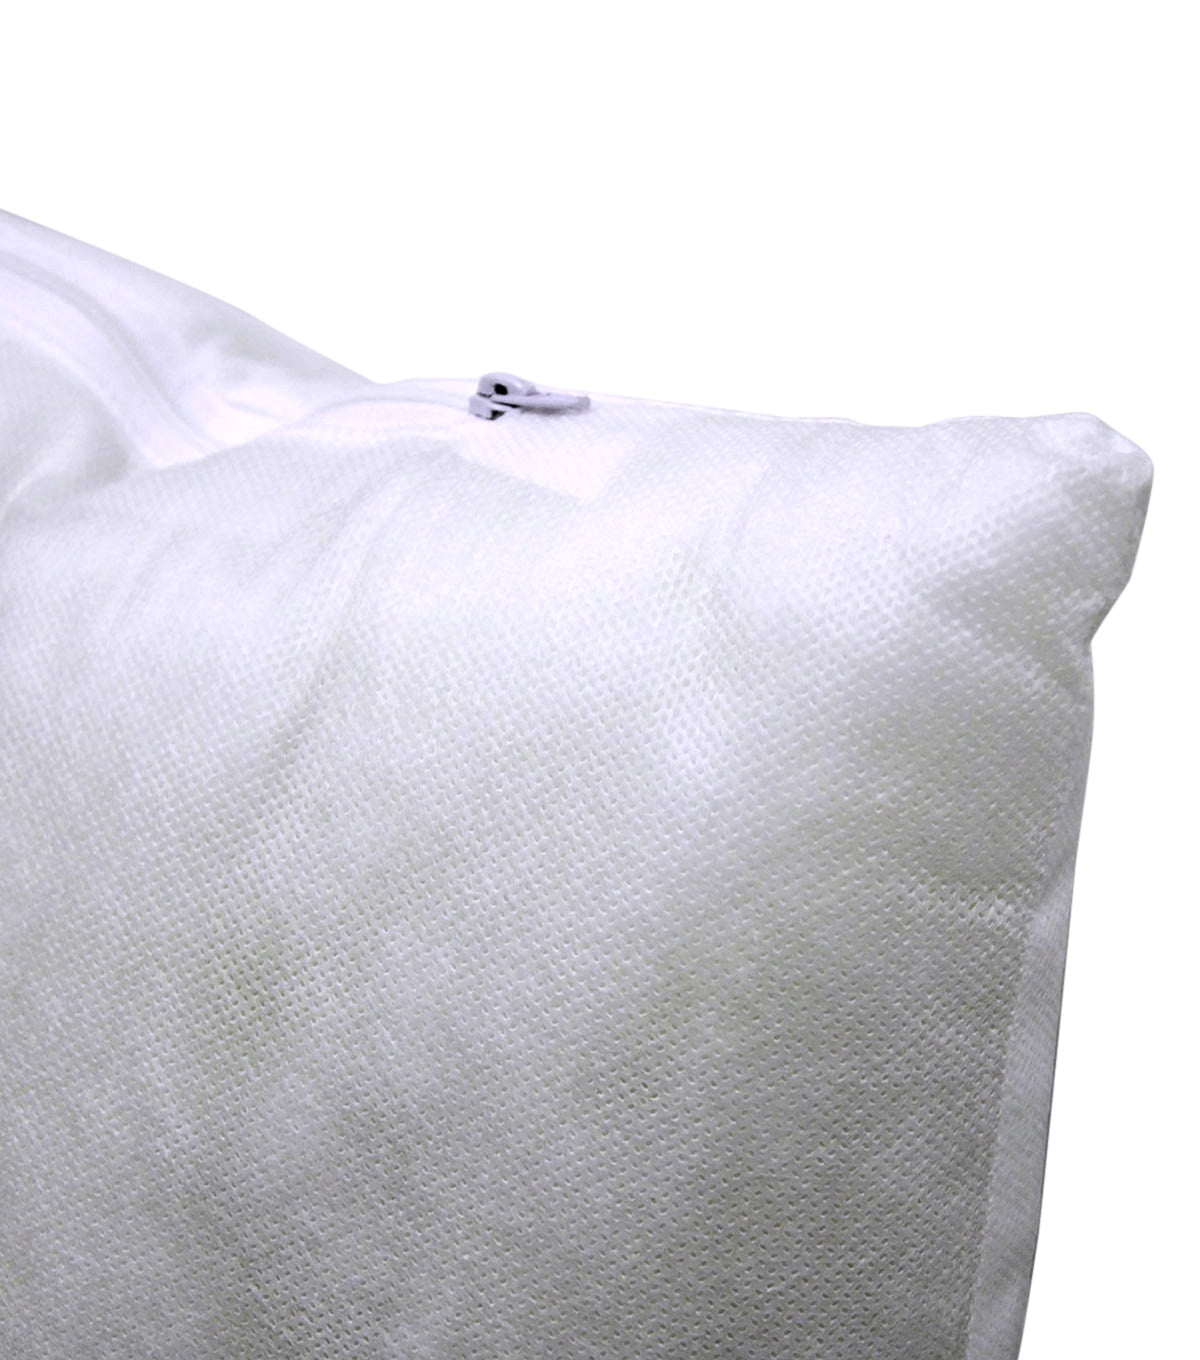 08″ x 08″ Pillow Form- Square – with PREMIUM polyester filling 